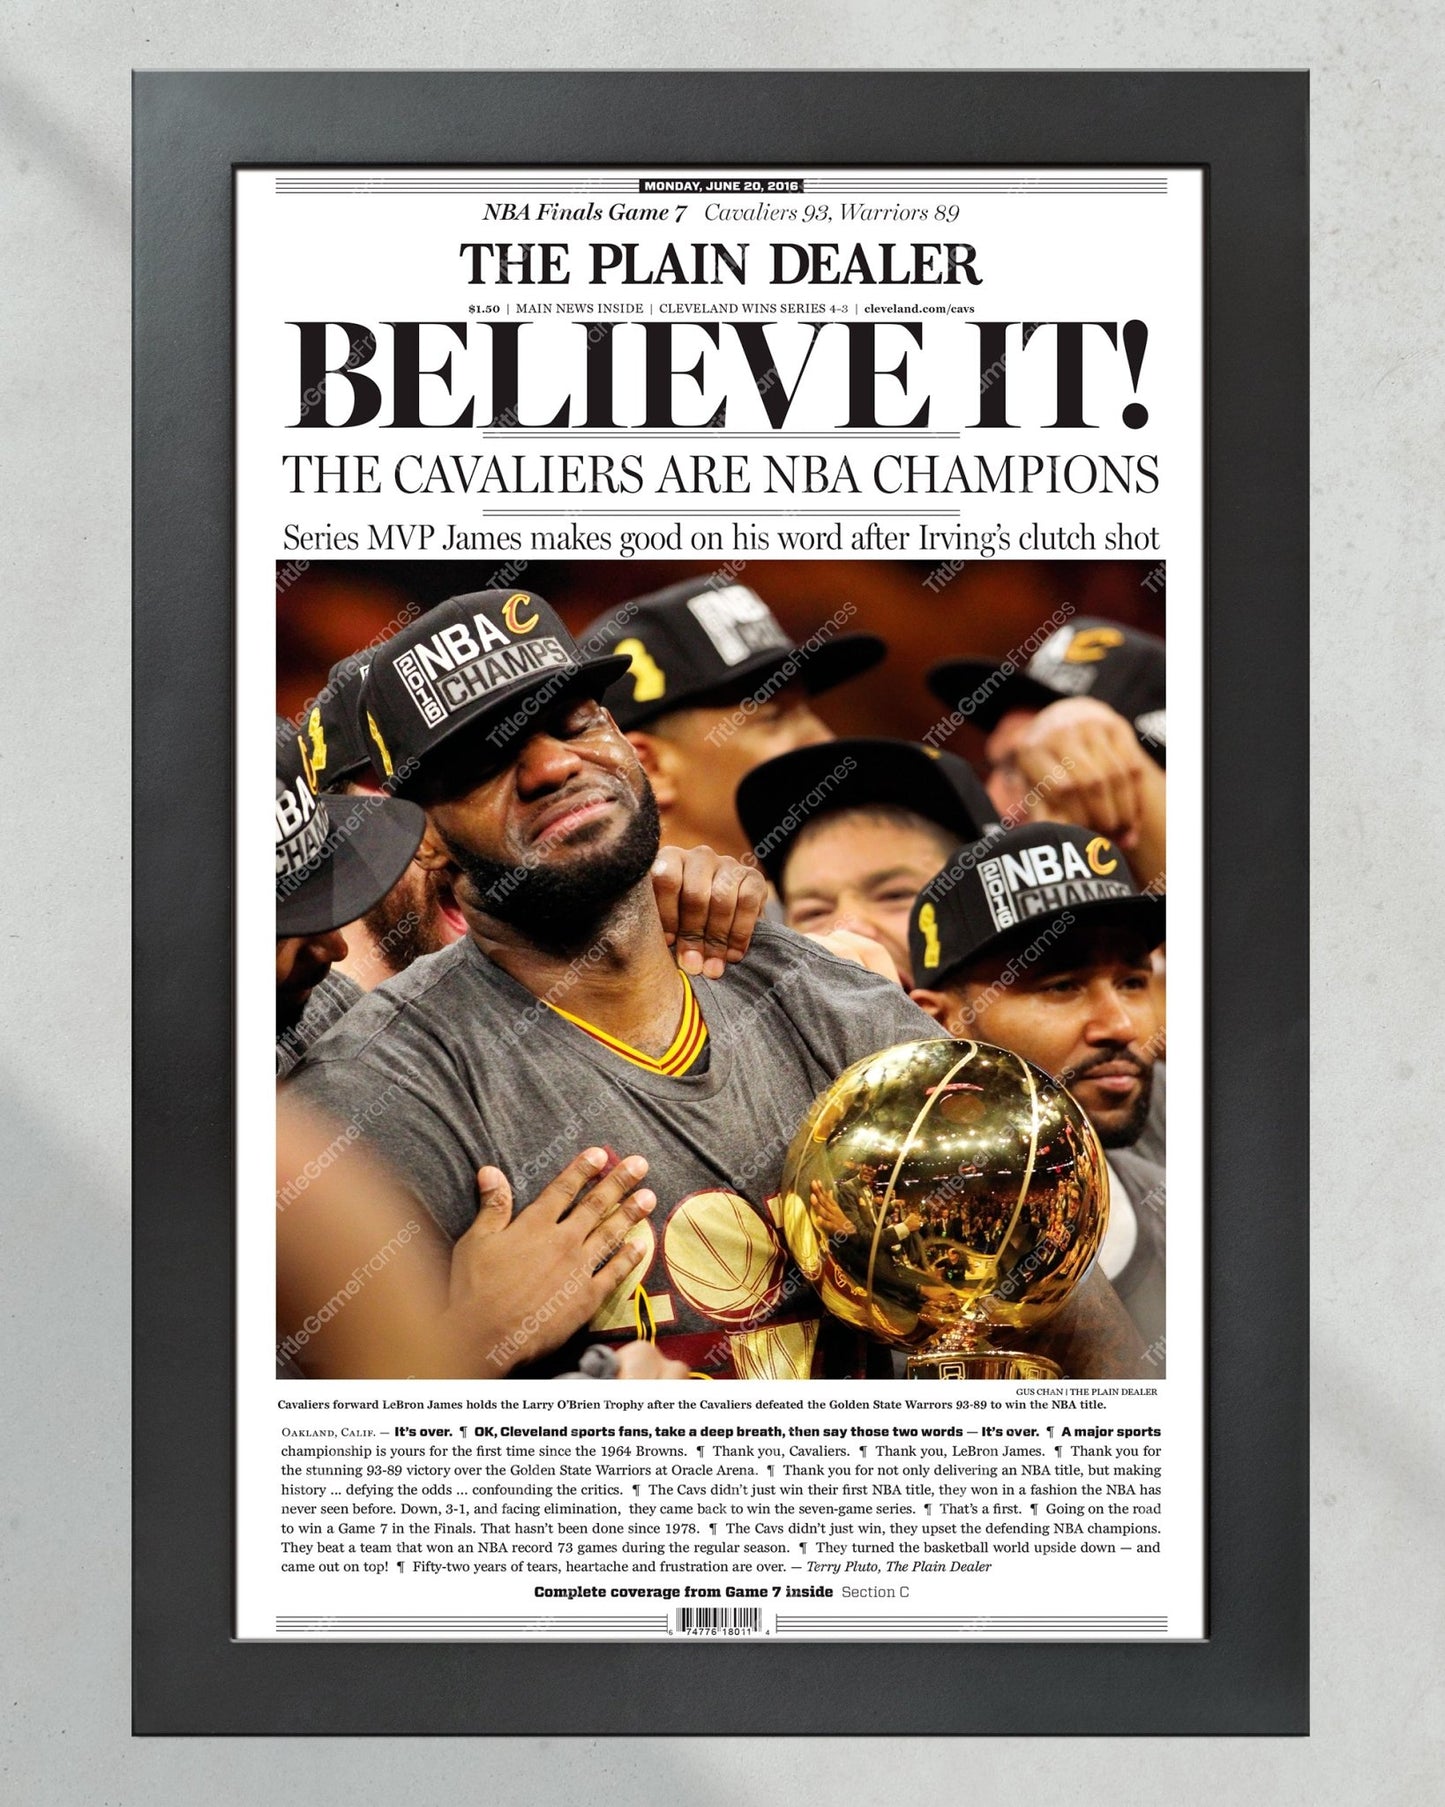 2016 Cleveland Cavaliers Cavs NBA Champions 'BELIEVE IT!' Framed Newspaper - Lebron James - Title Game Frames